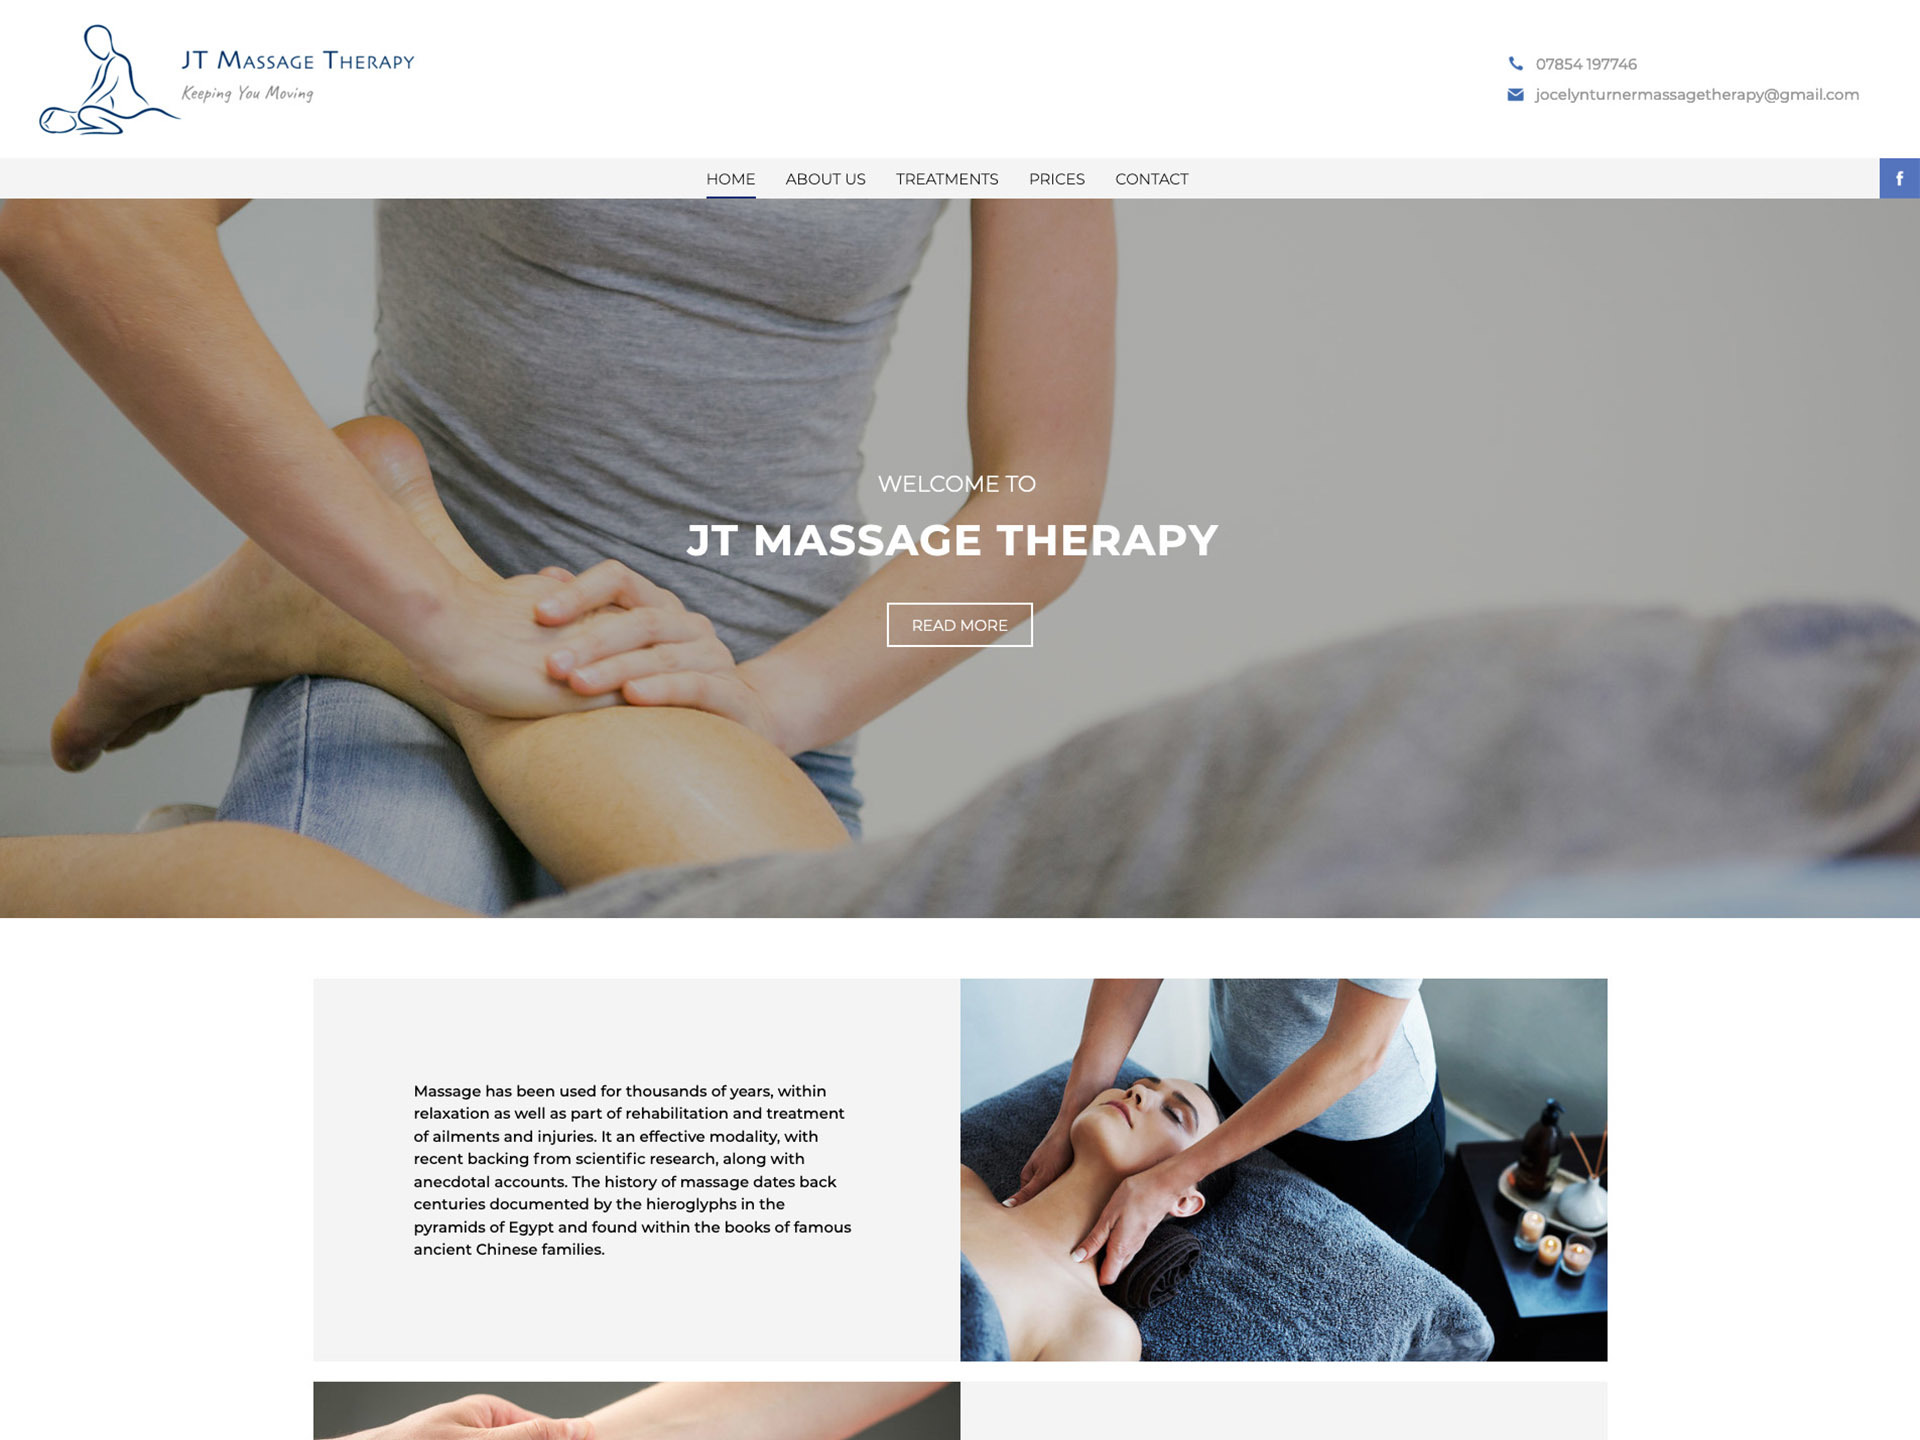 A website for a massage company